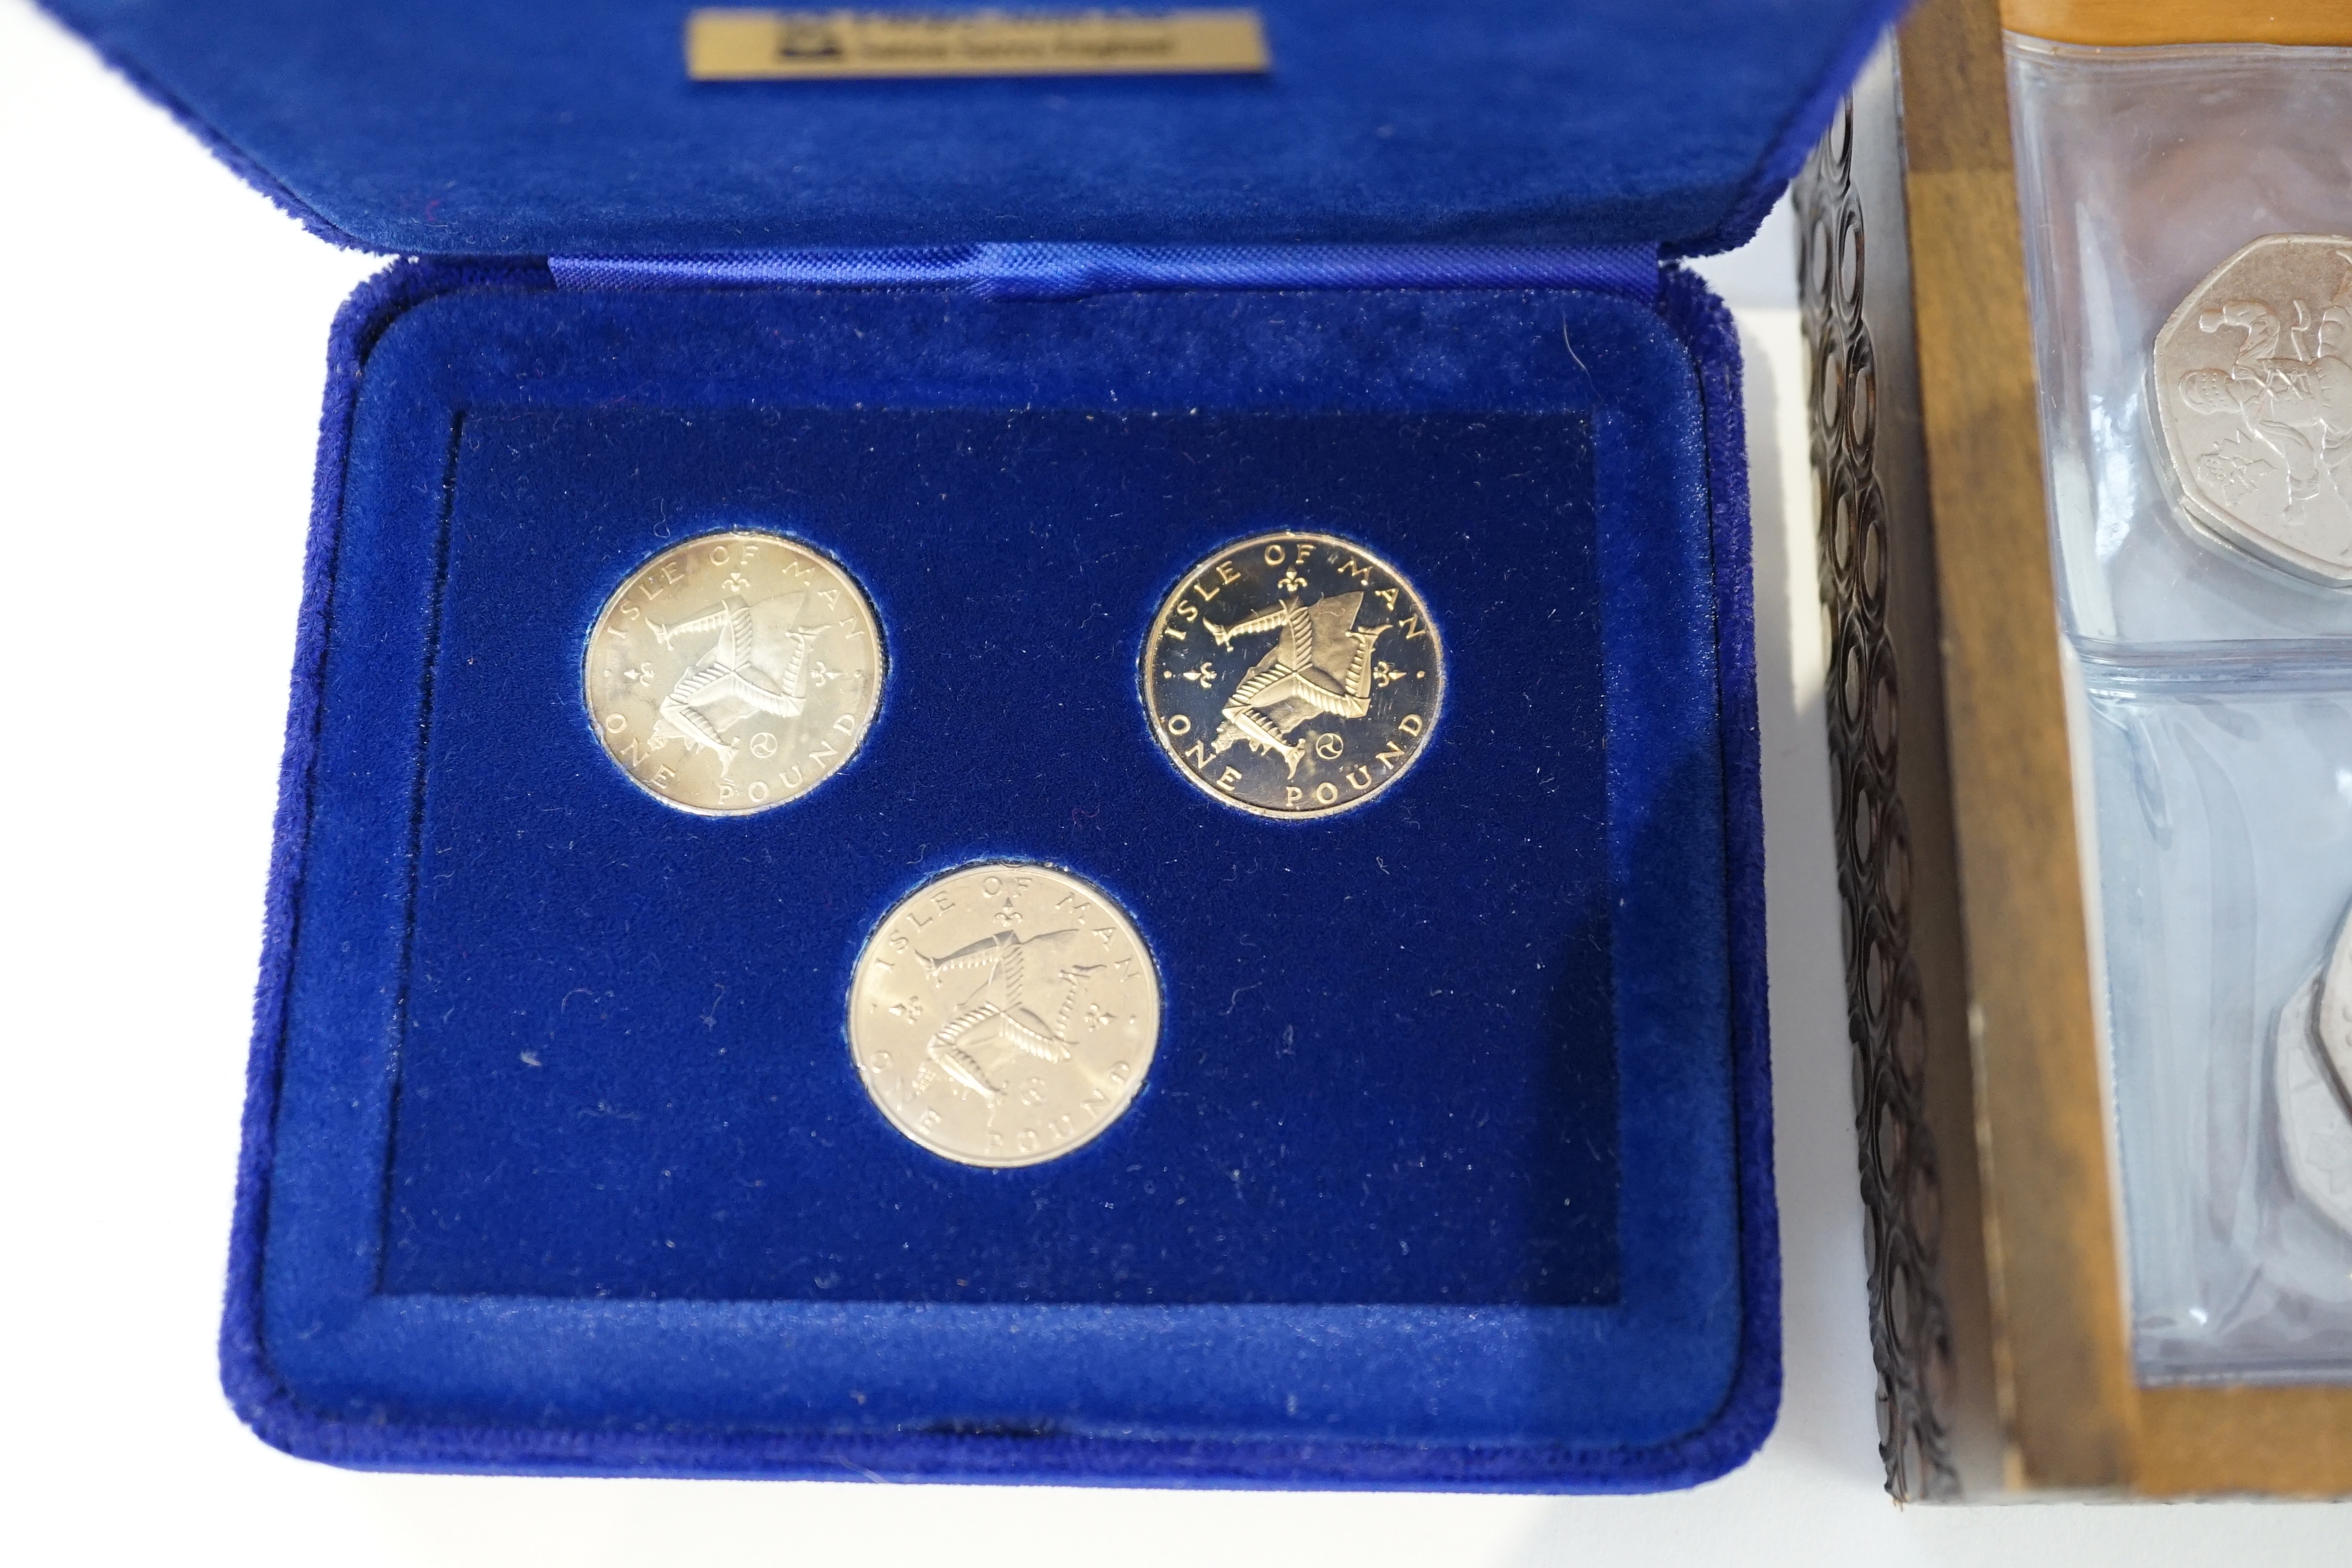 British coins, 1953 coronation coin and commemorative stamp set issued by Jubilee Mint, George V First World War maundy silver threepence set, issued by Bradford Exchange, a Bailiwick of Jersey £5, 2016 and Isle of Man o